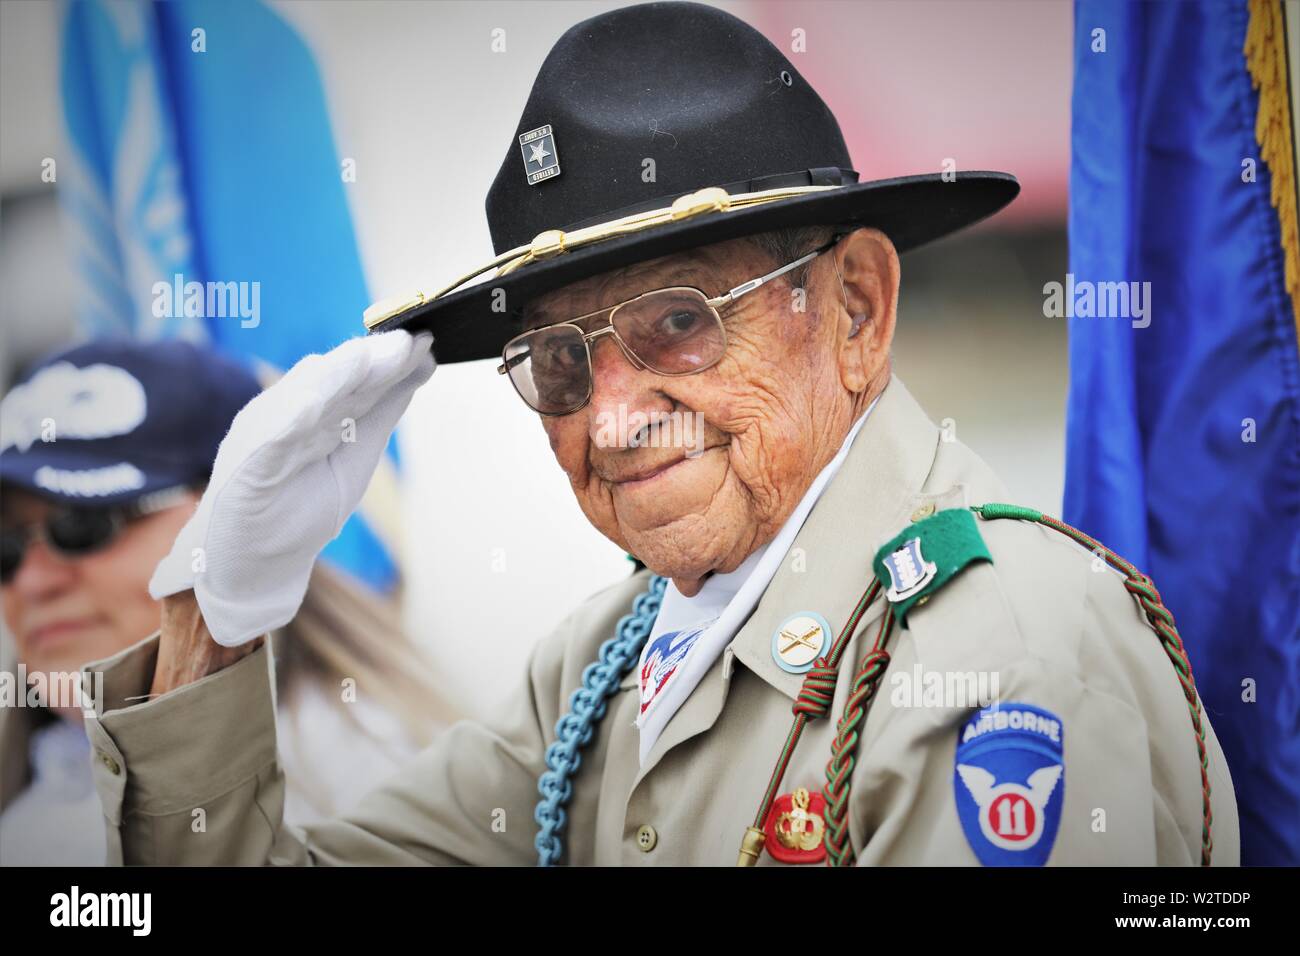 World War 2 II real veteran in parade being proud of his past military service in fighting for American values in USA Family 92 Yr old Army vet Stock Photo